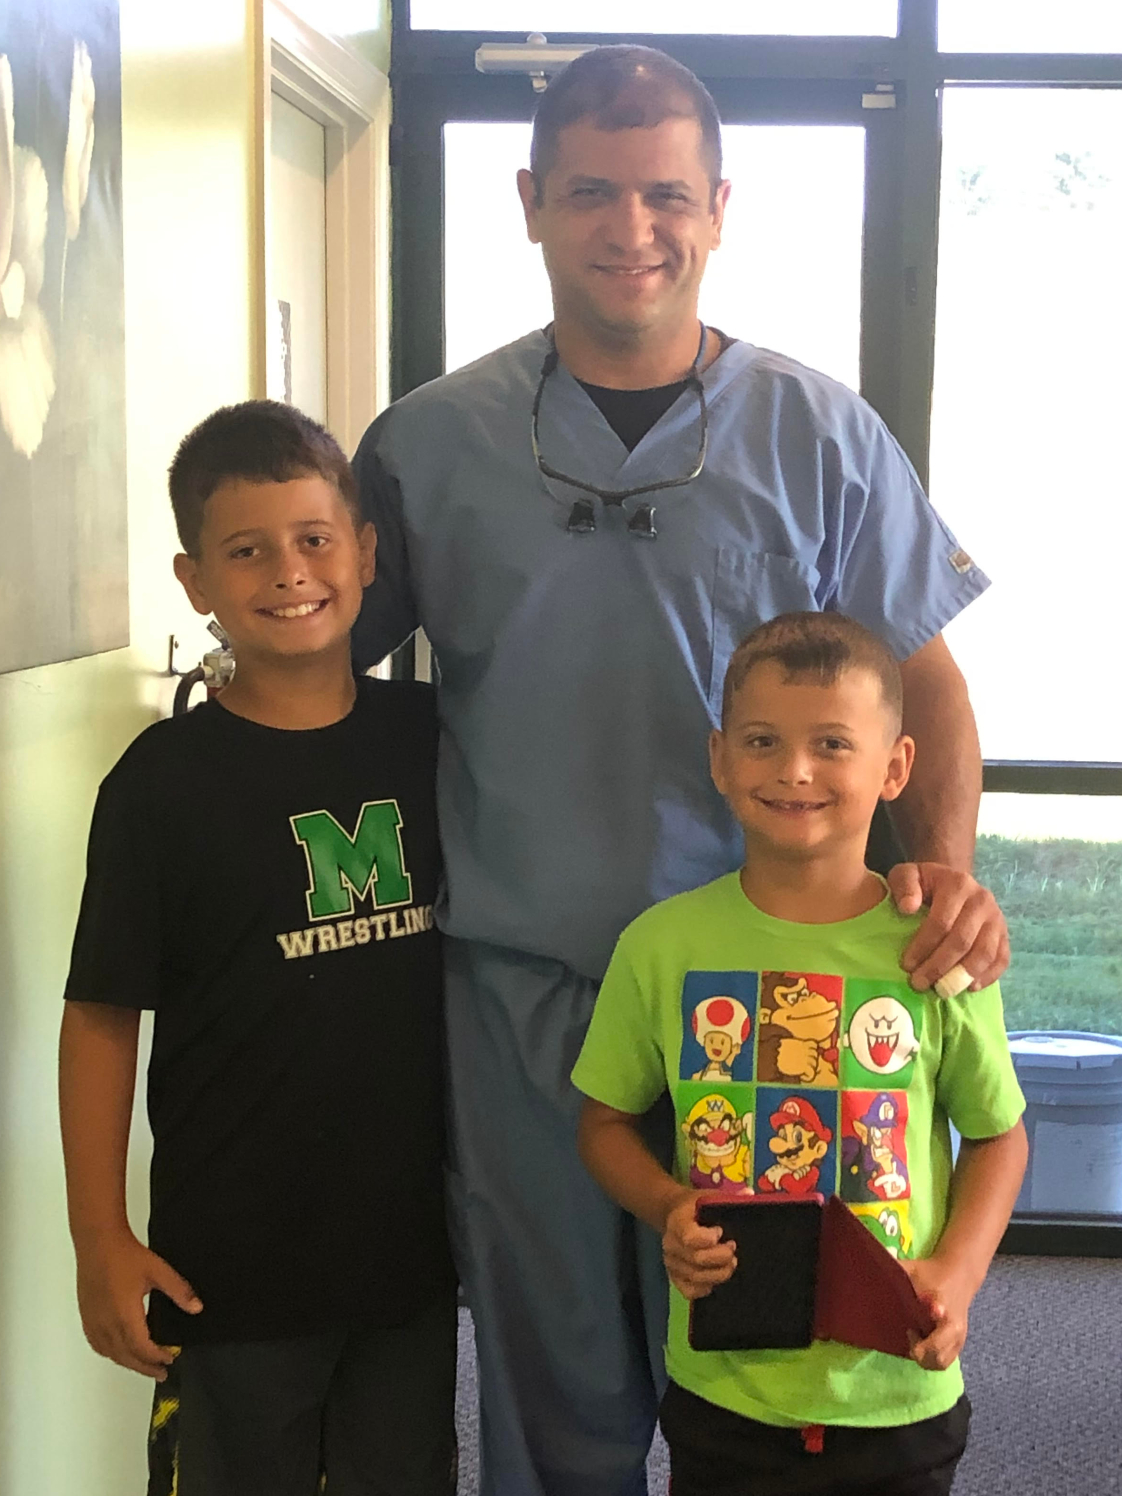 Dr. Balsly and his two sons